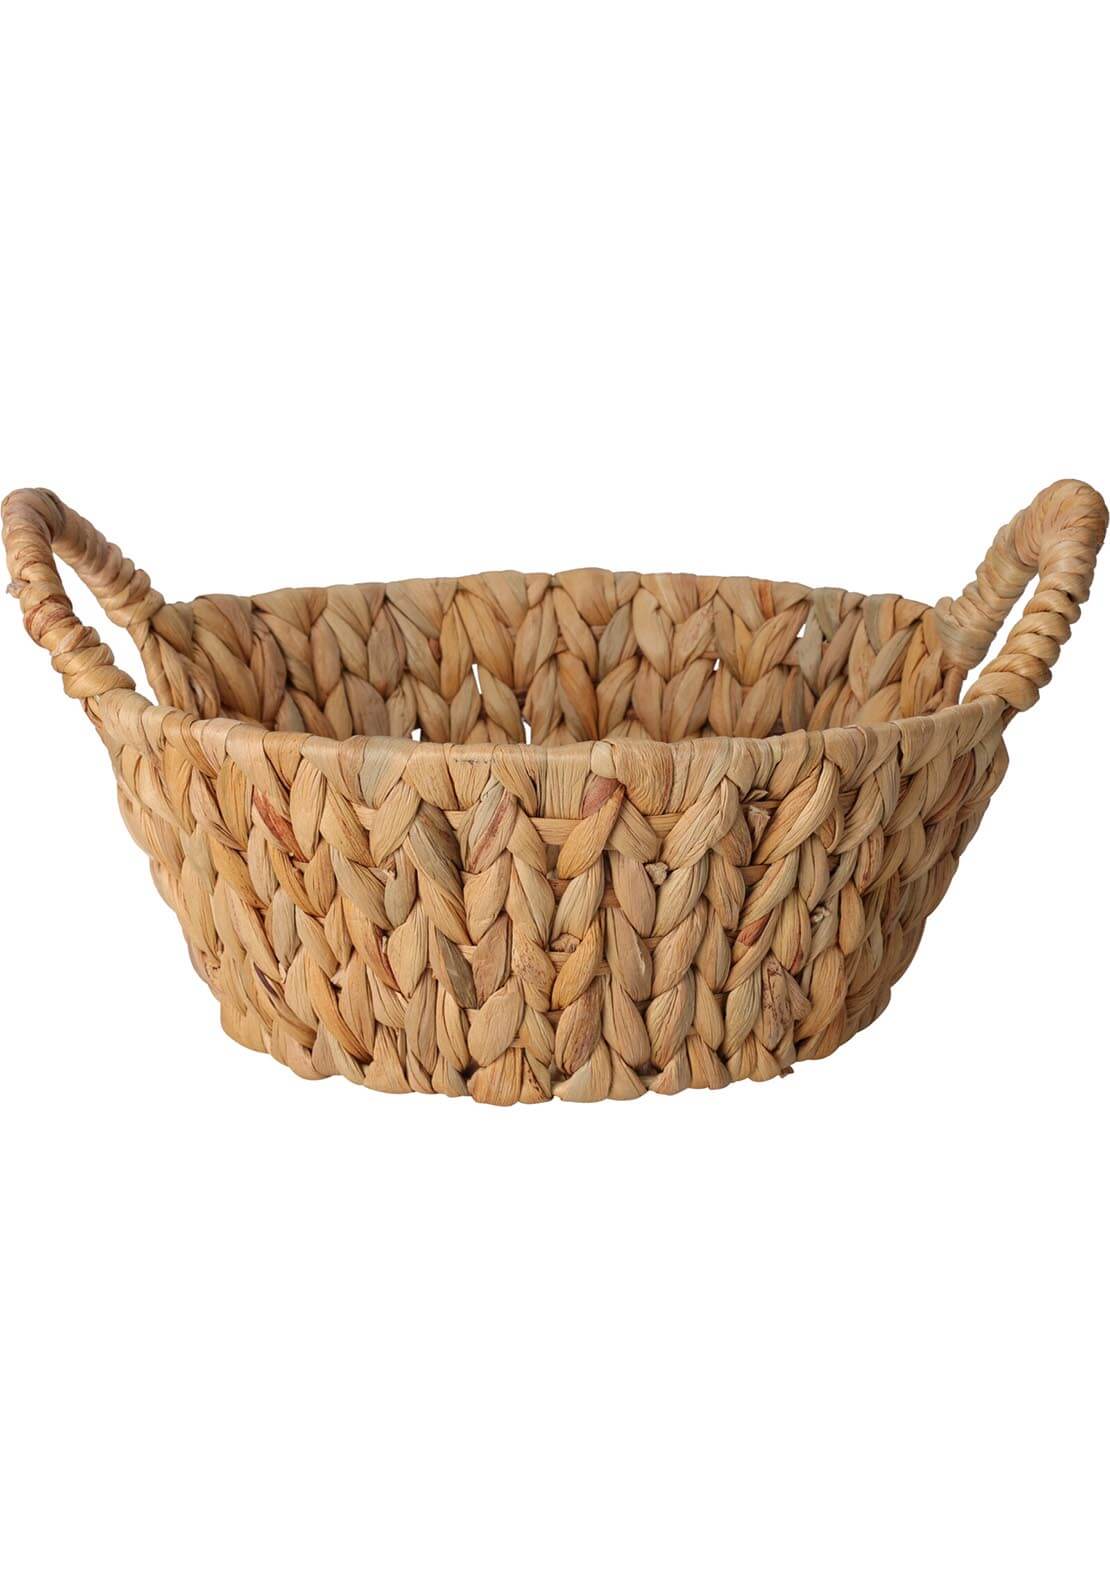 The Home Garden Basket Round With Handles 1 Shaws Department Stores